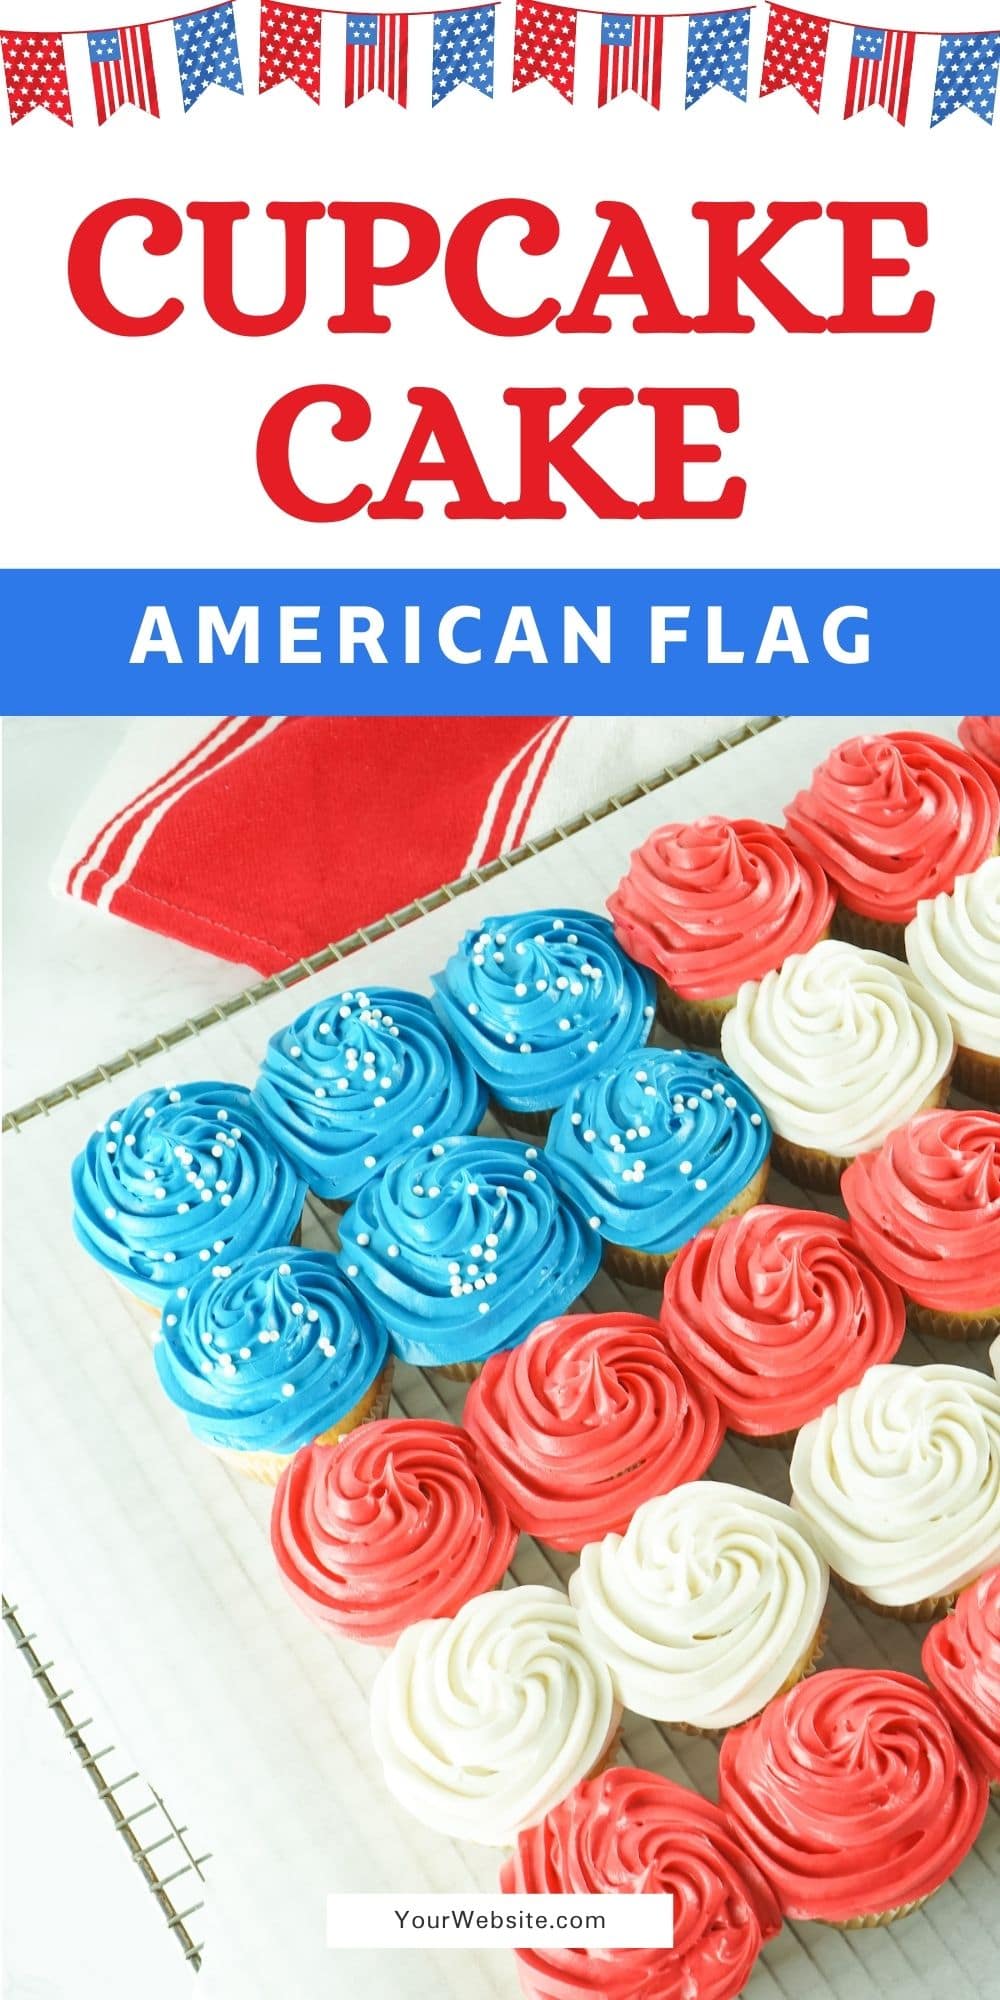 Side shot of american flag cupcake cake with recipe title on top of image